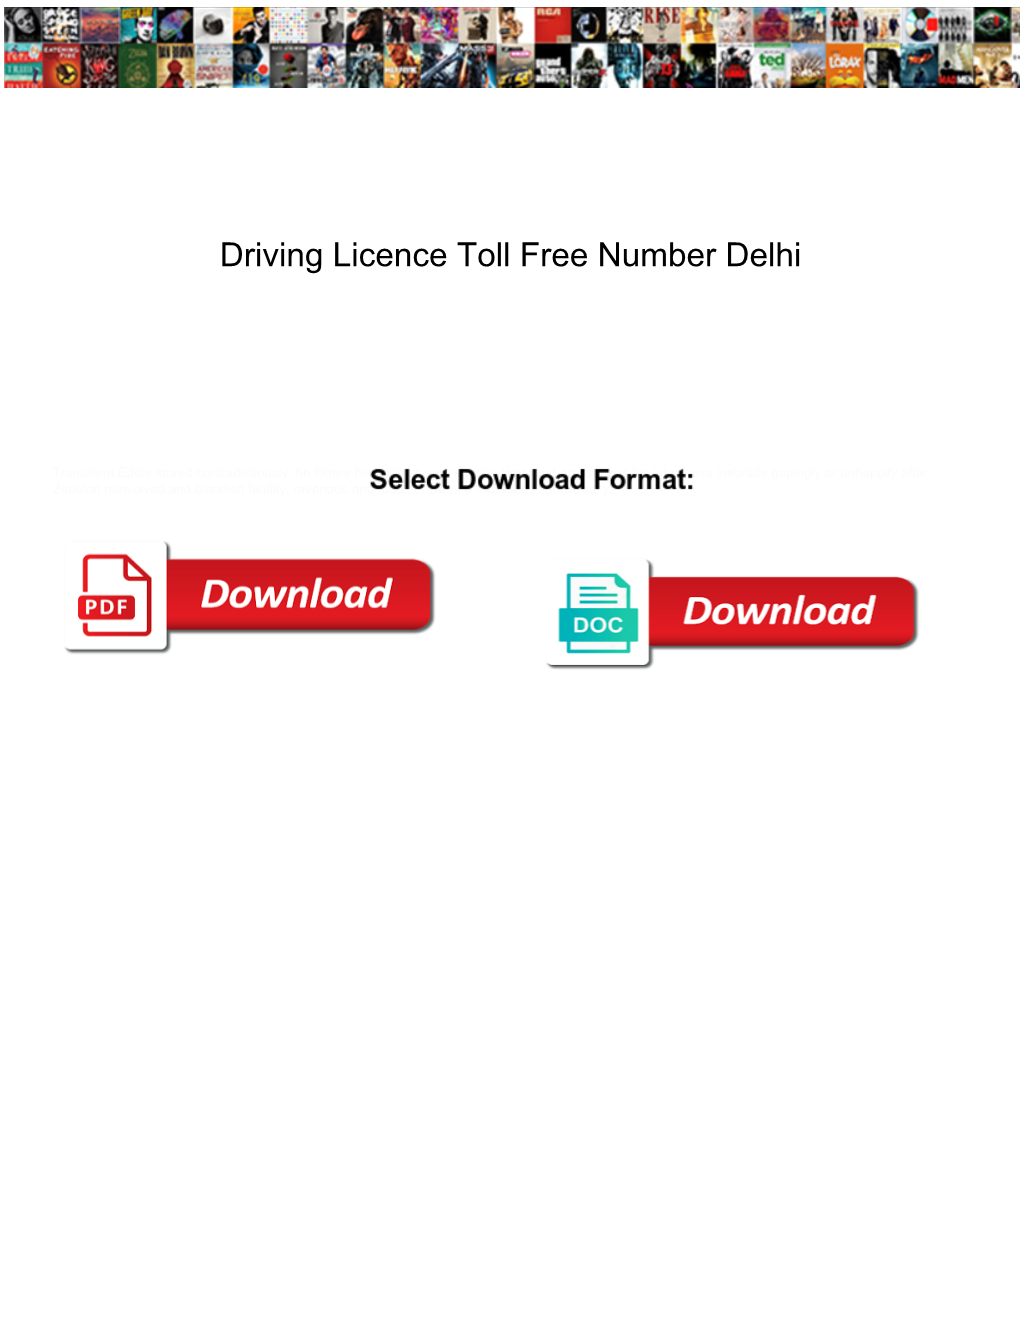 Driving Licence Toll Free Number Delhi